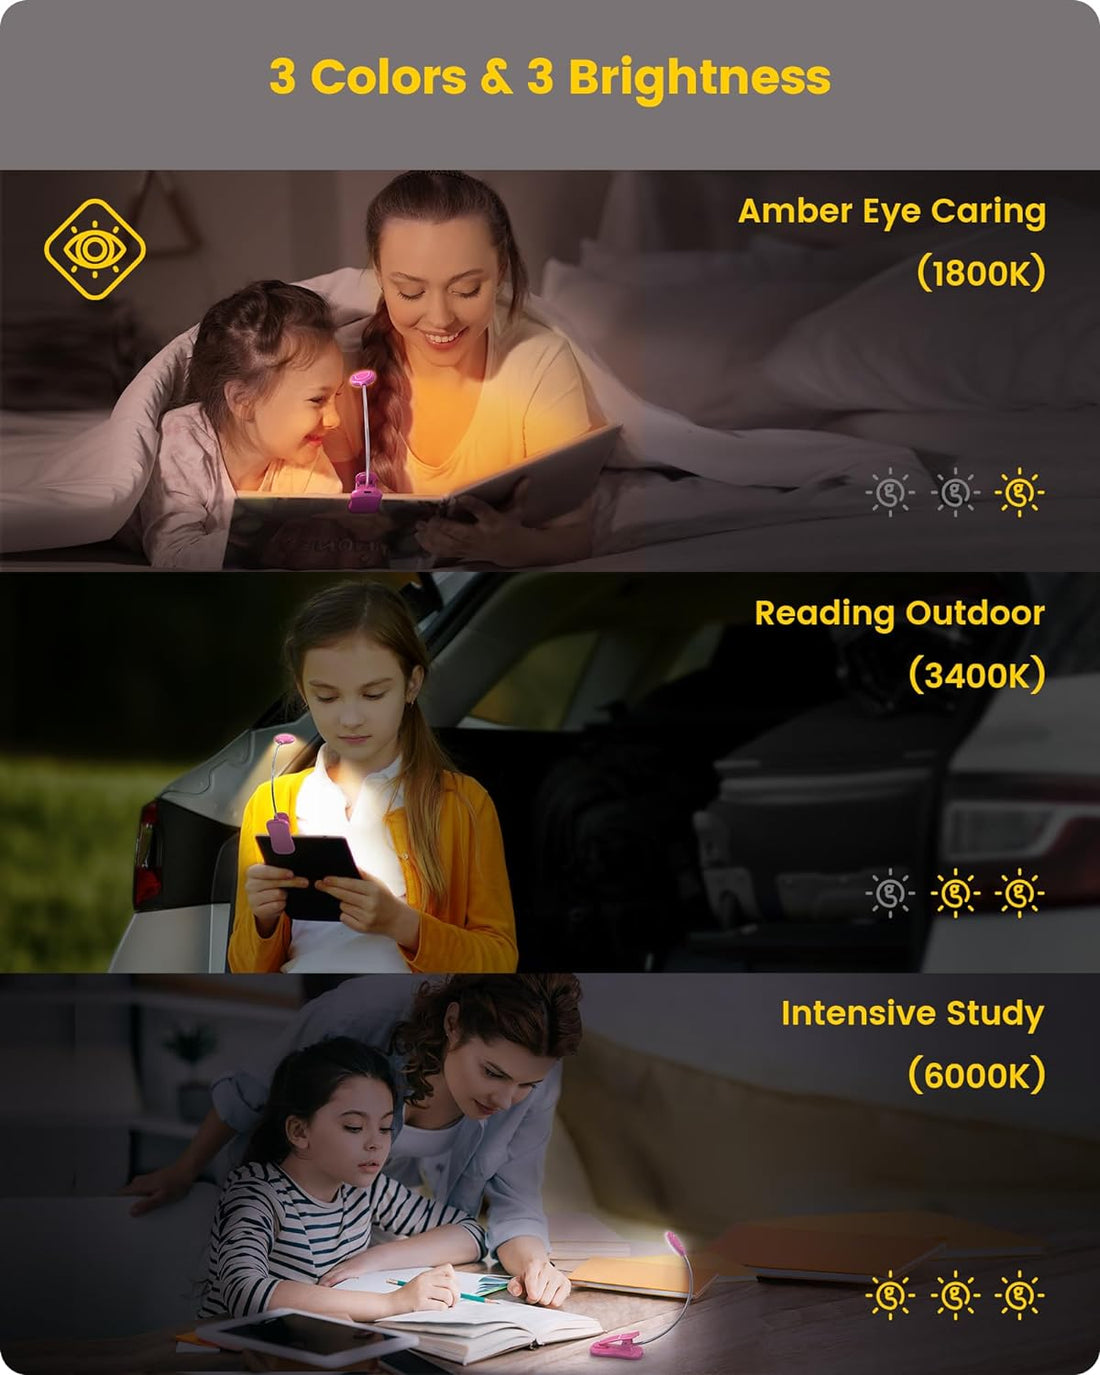 Glocusent 16 LED Rechargeable Book Light for Kids, Clip-on Kids Reading Light for Books in Bed, 3 Amber Colors & 3 Brightness Adjustable, Eye Caring & Kids Safe, 80+ Hrs Reading, Perfect for Kids